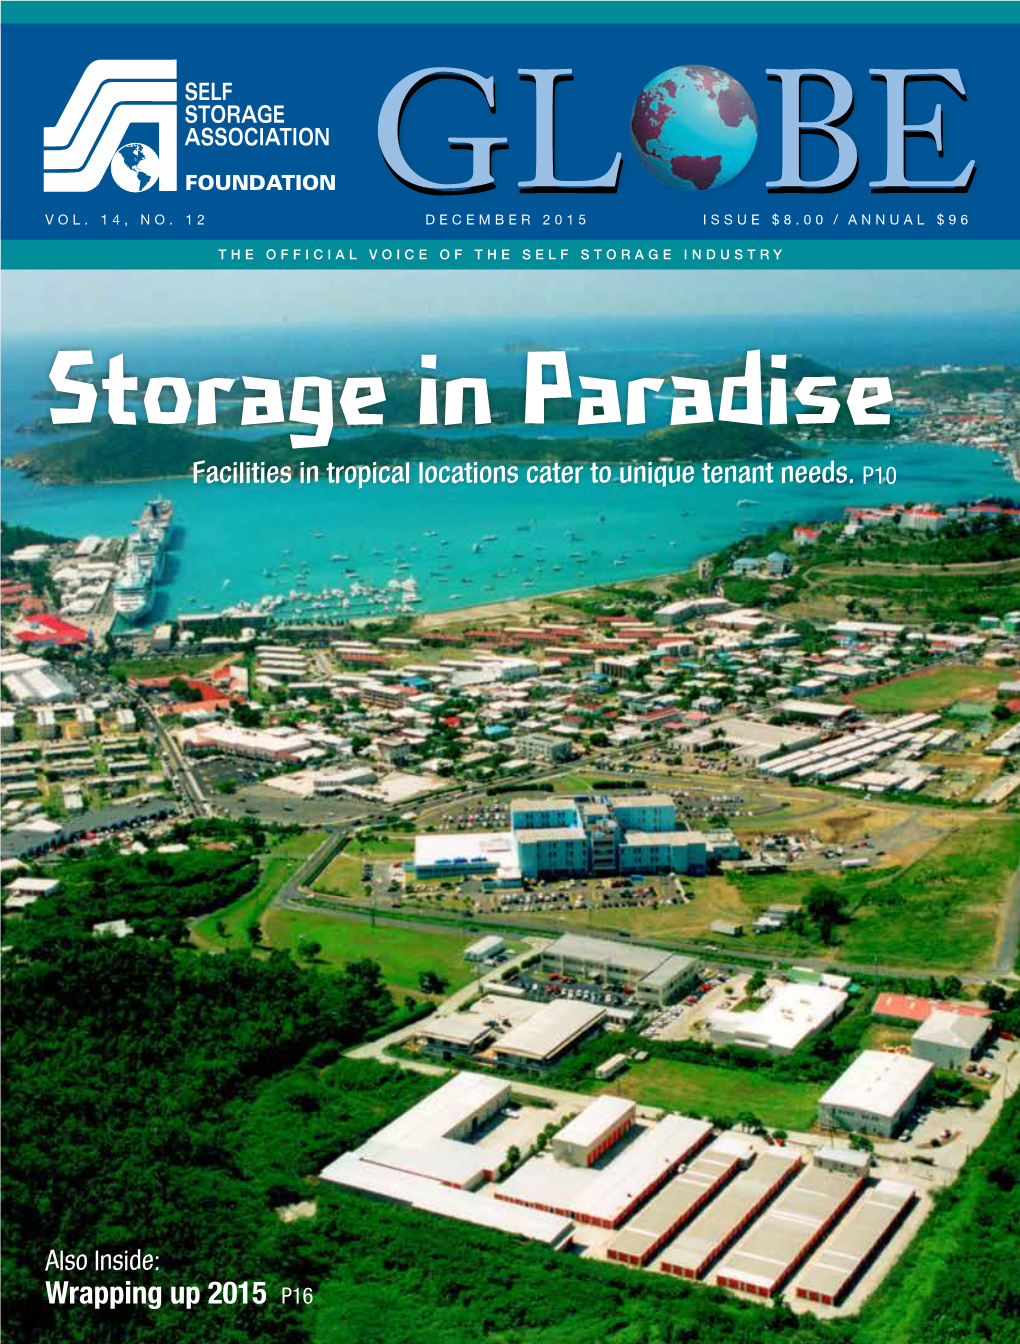 Storage in Paradise Facilities in Tropical Locations Cater to Unique Tenant Needs